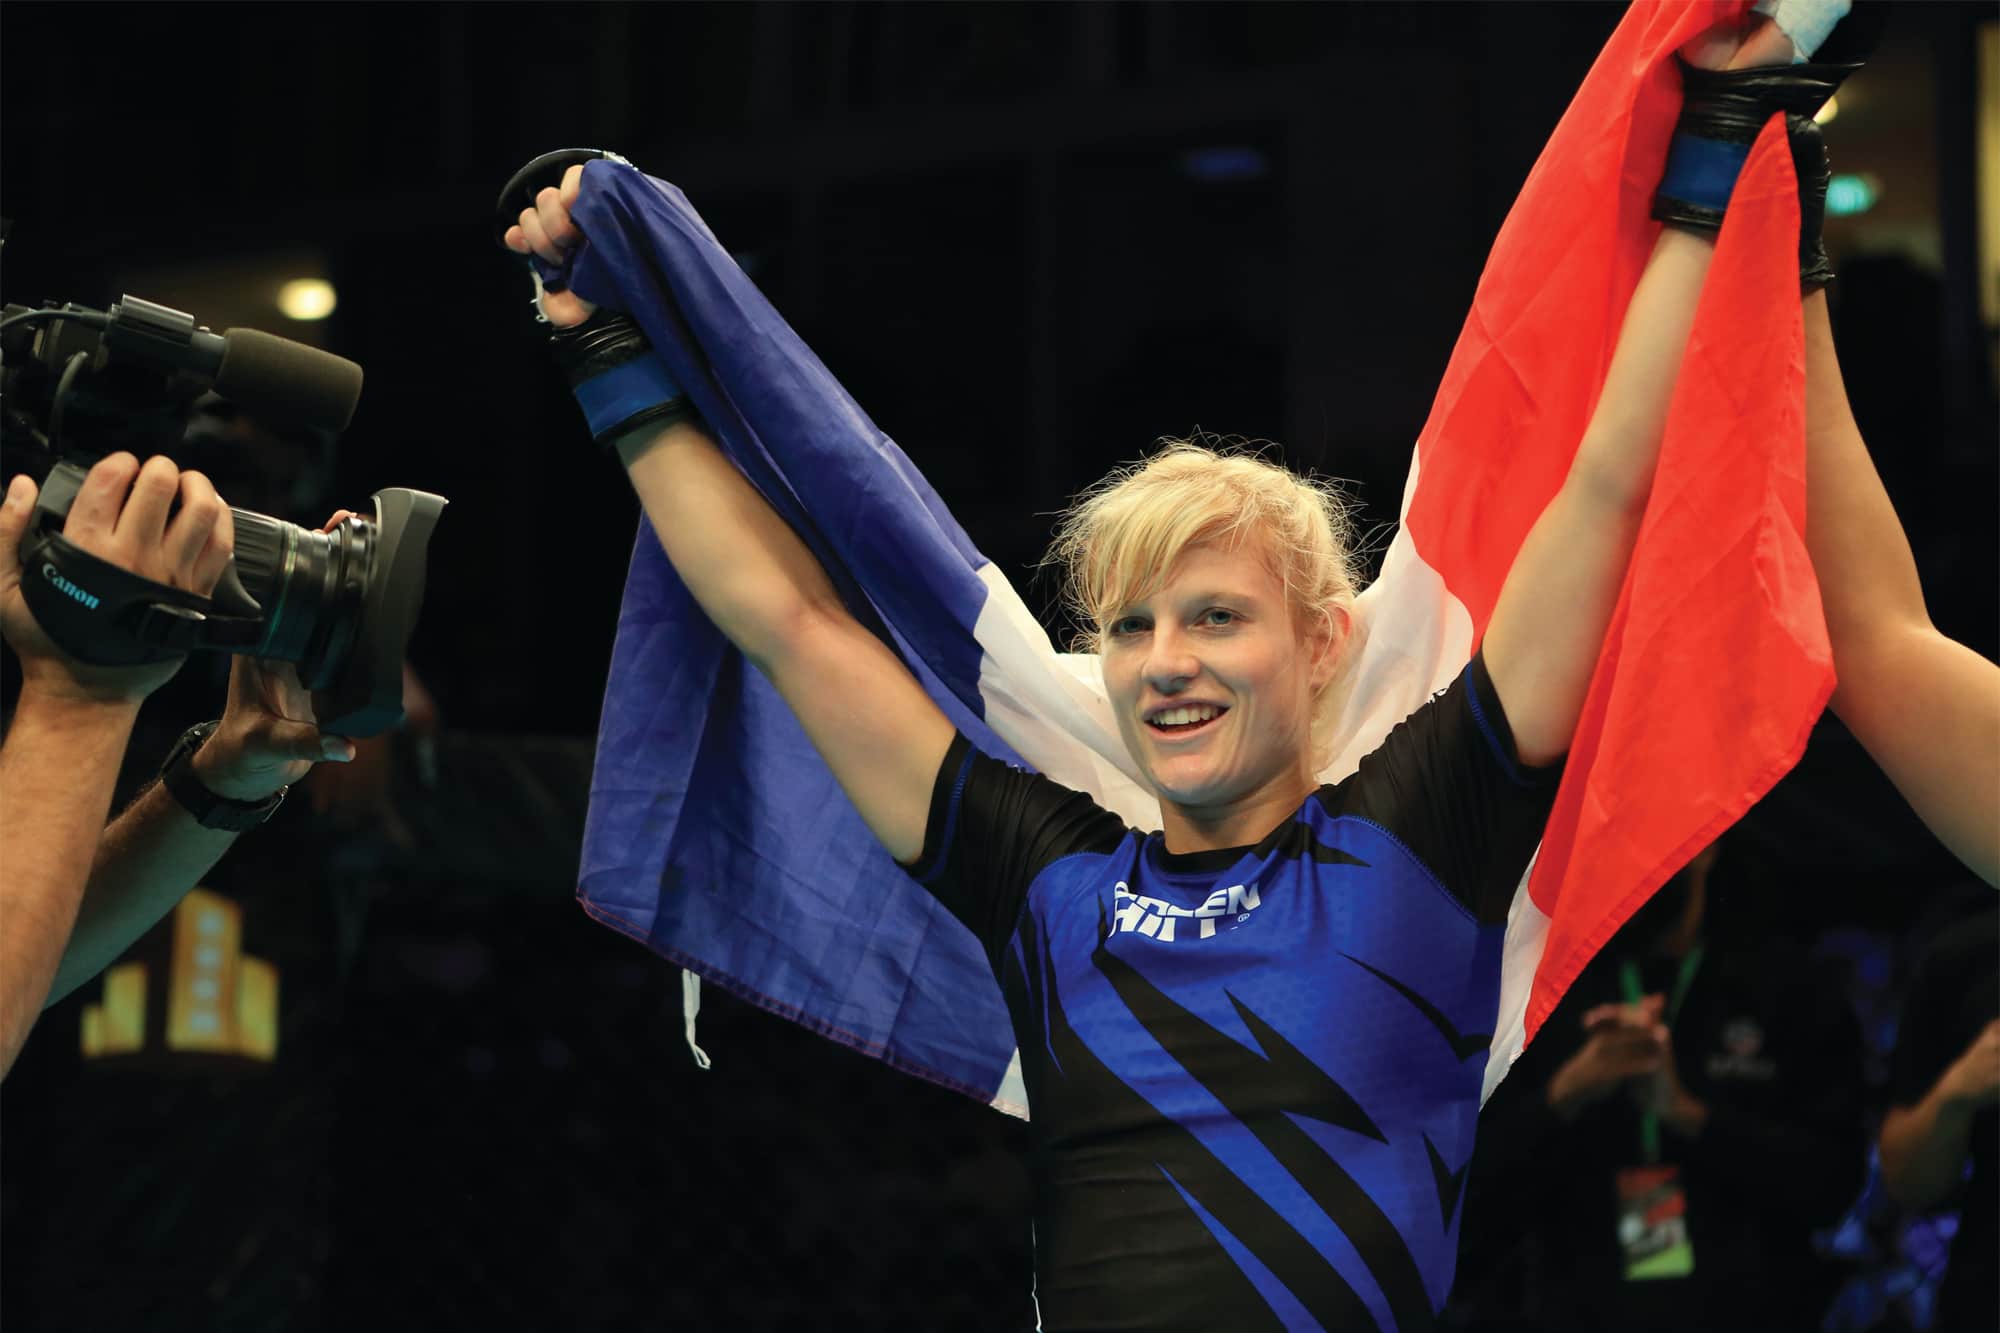 5 IMMAF alumni who are setting the gold standard as Pros